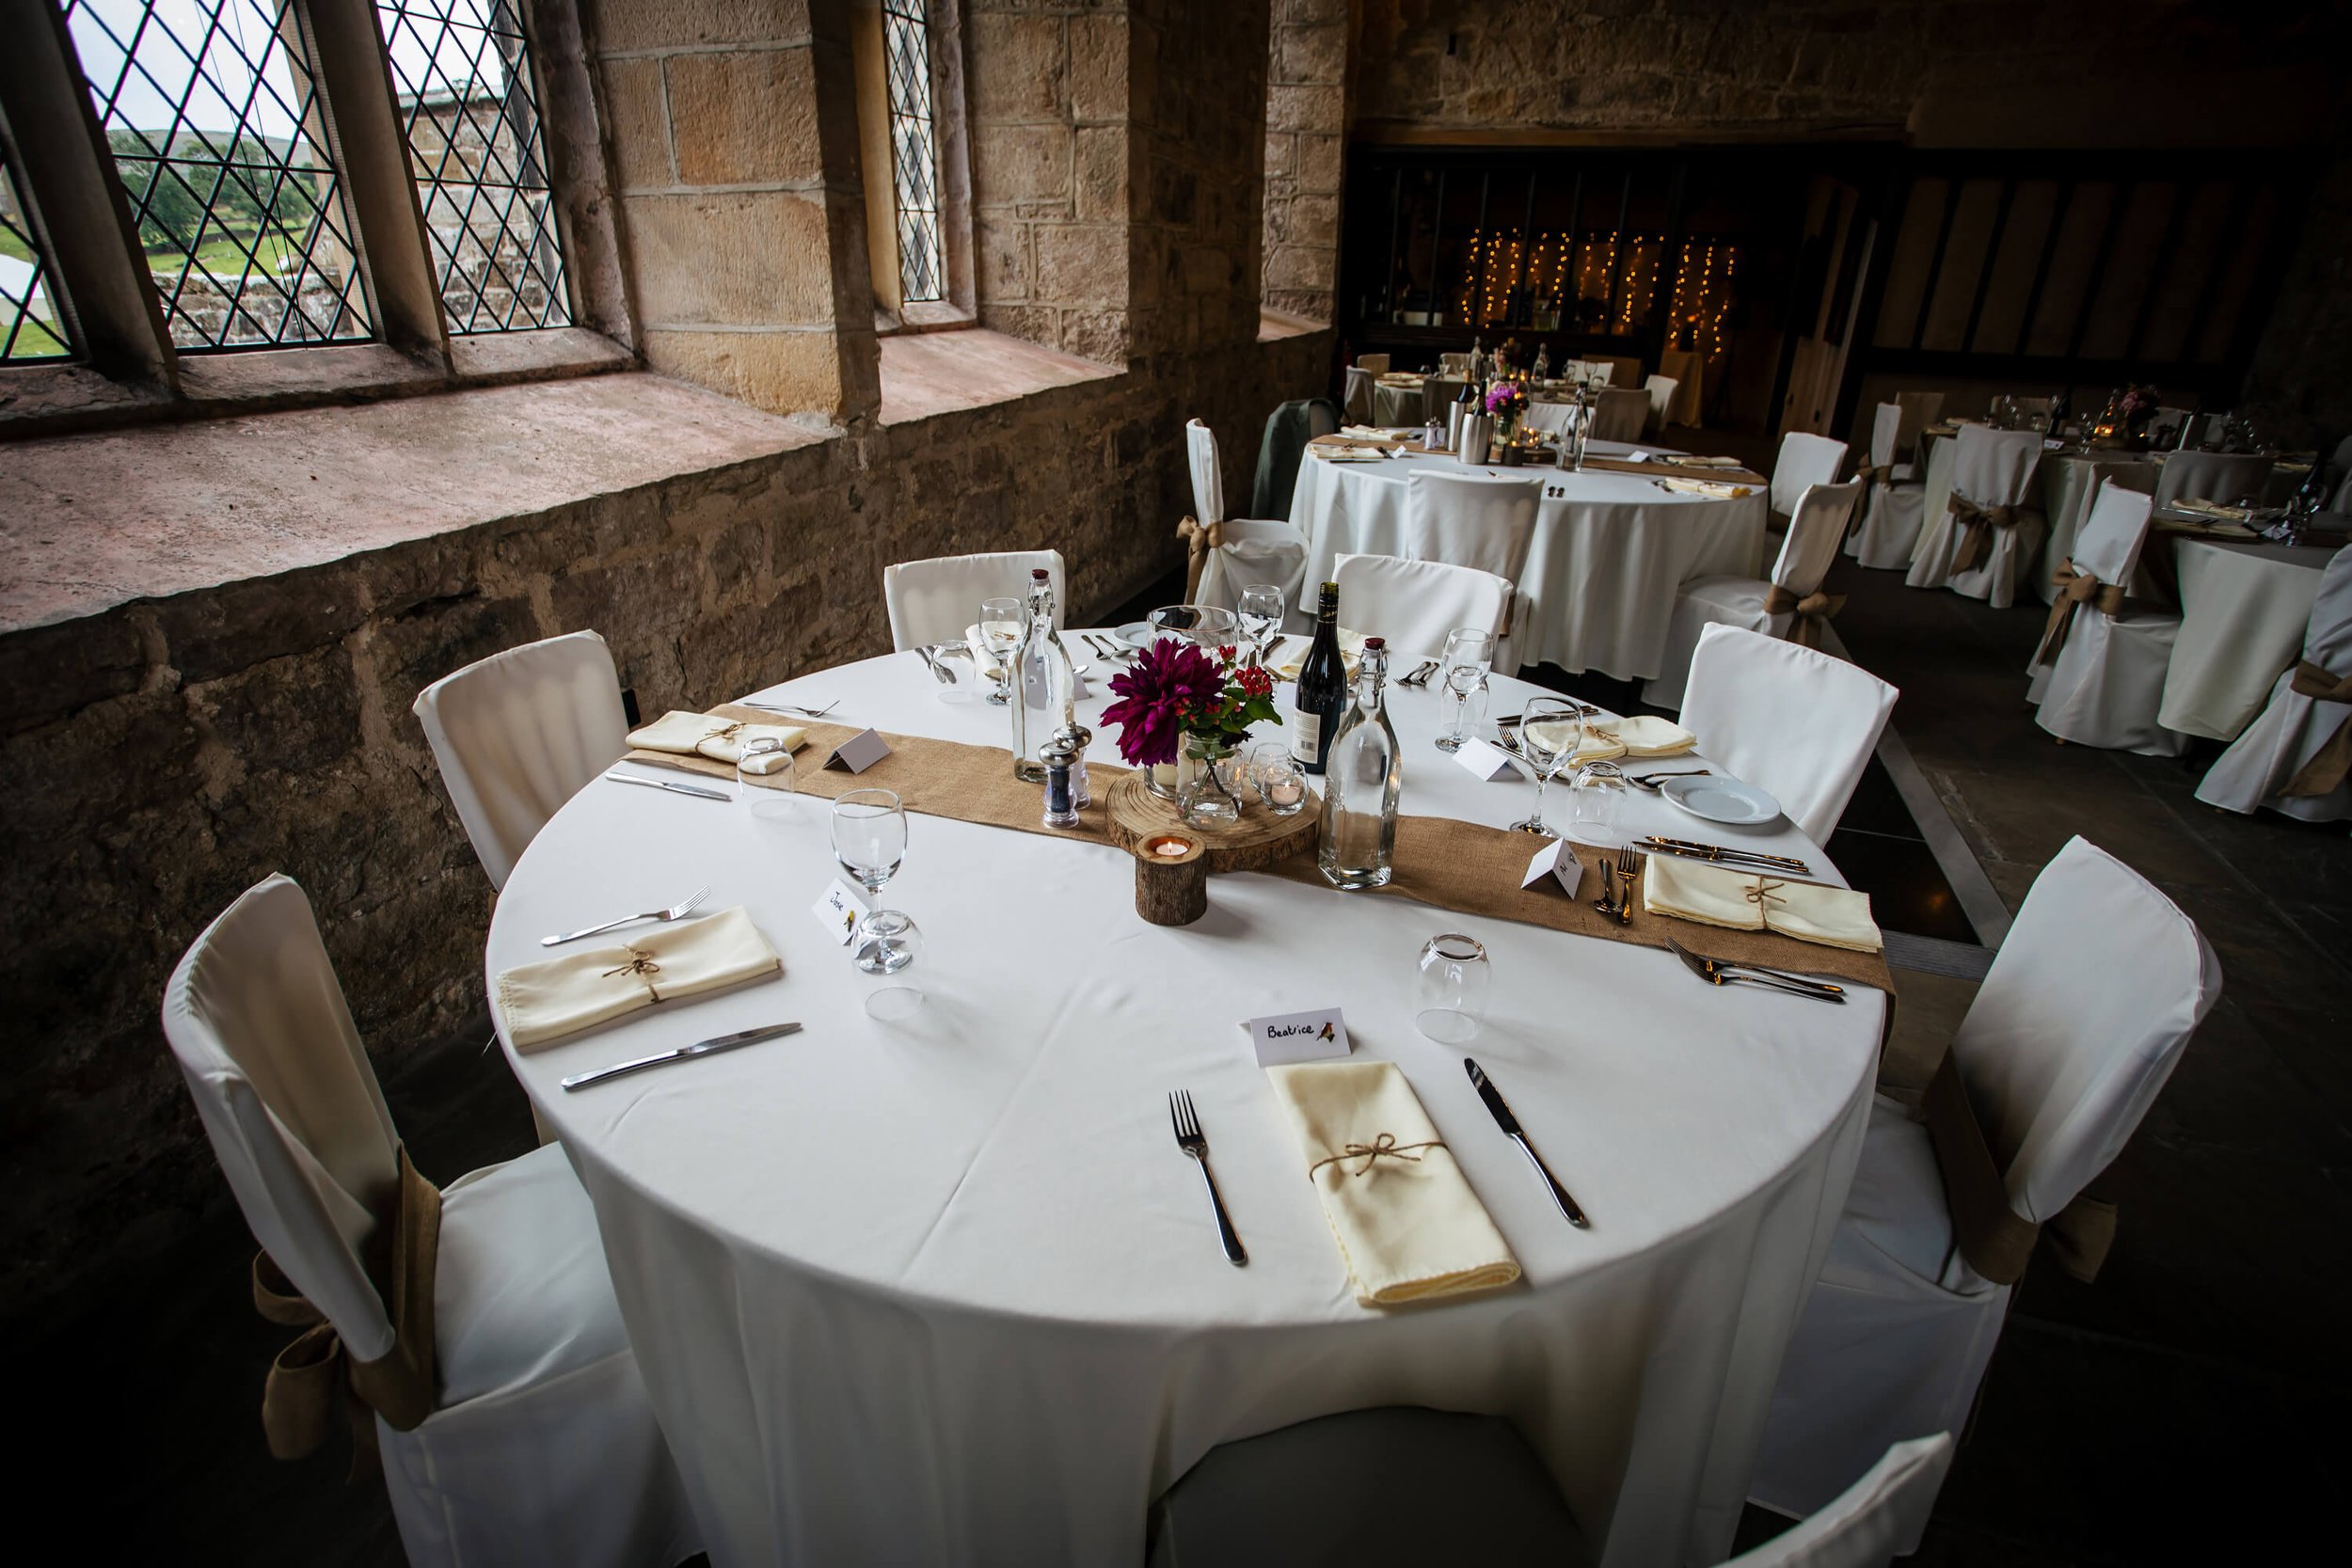 Tables set up for the wedding reception at Barden Tower